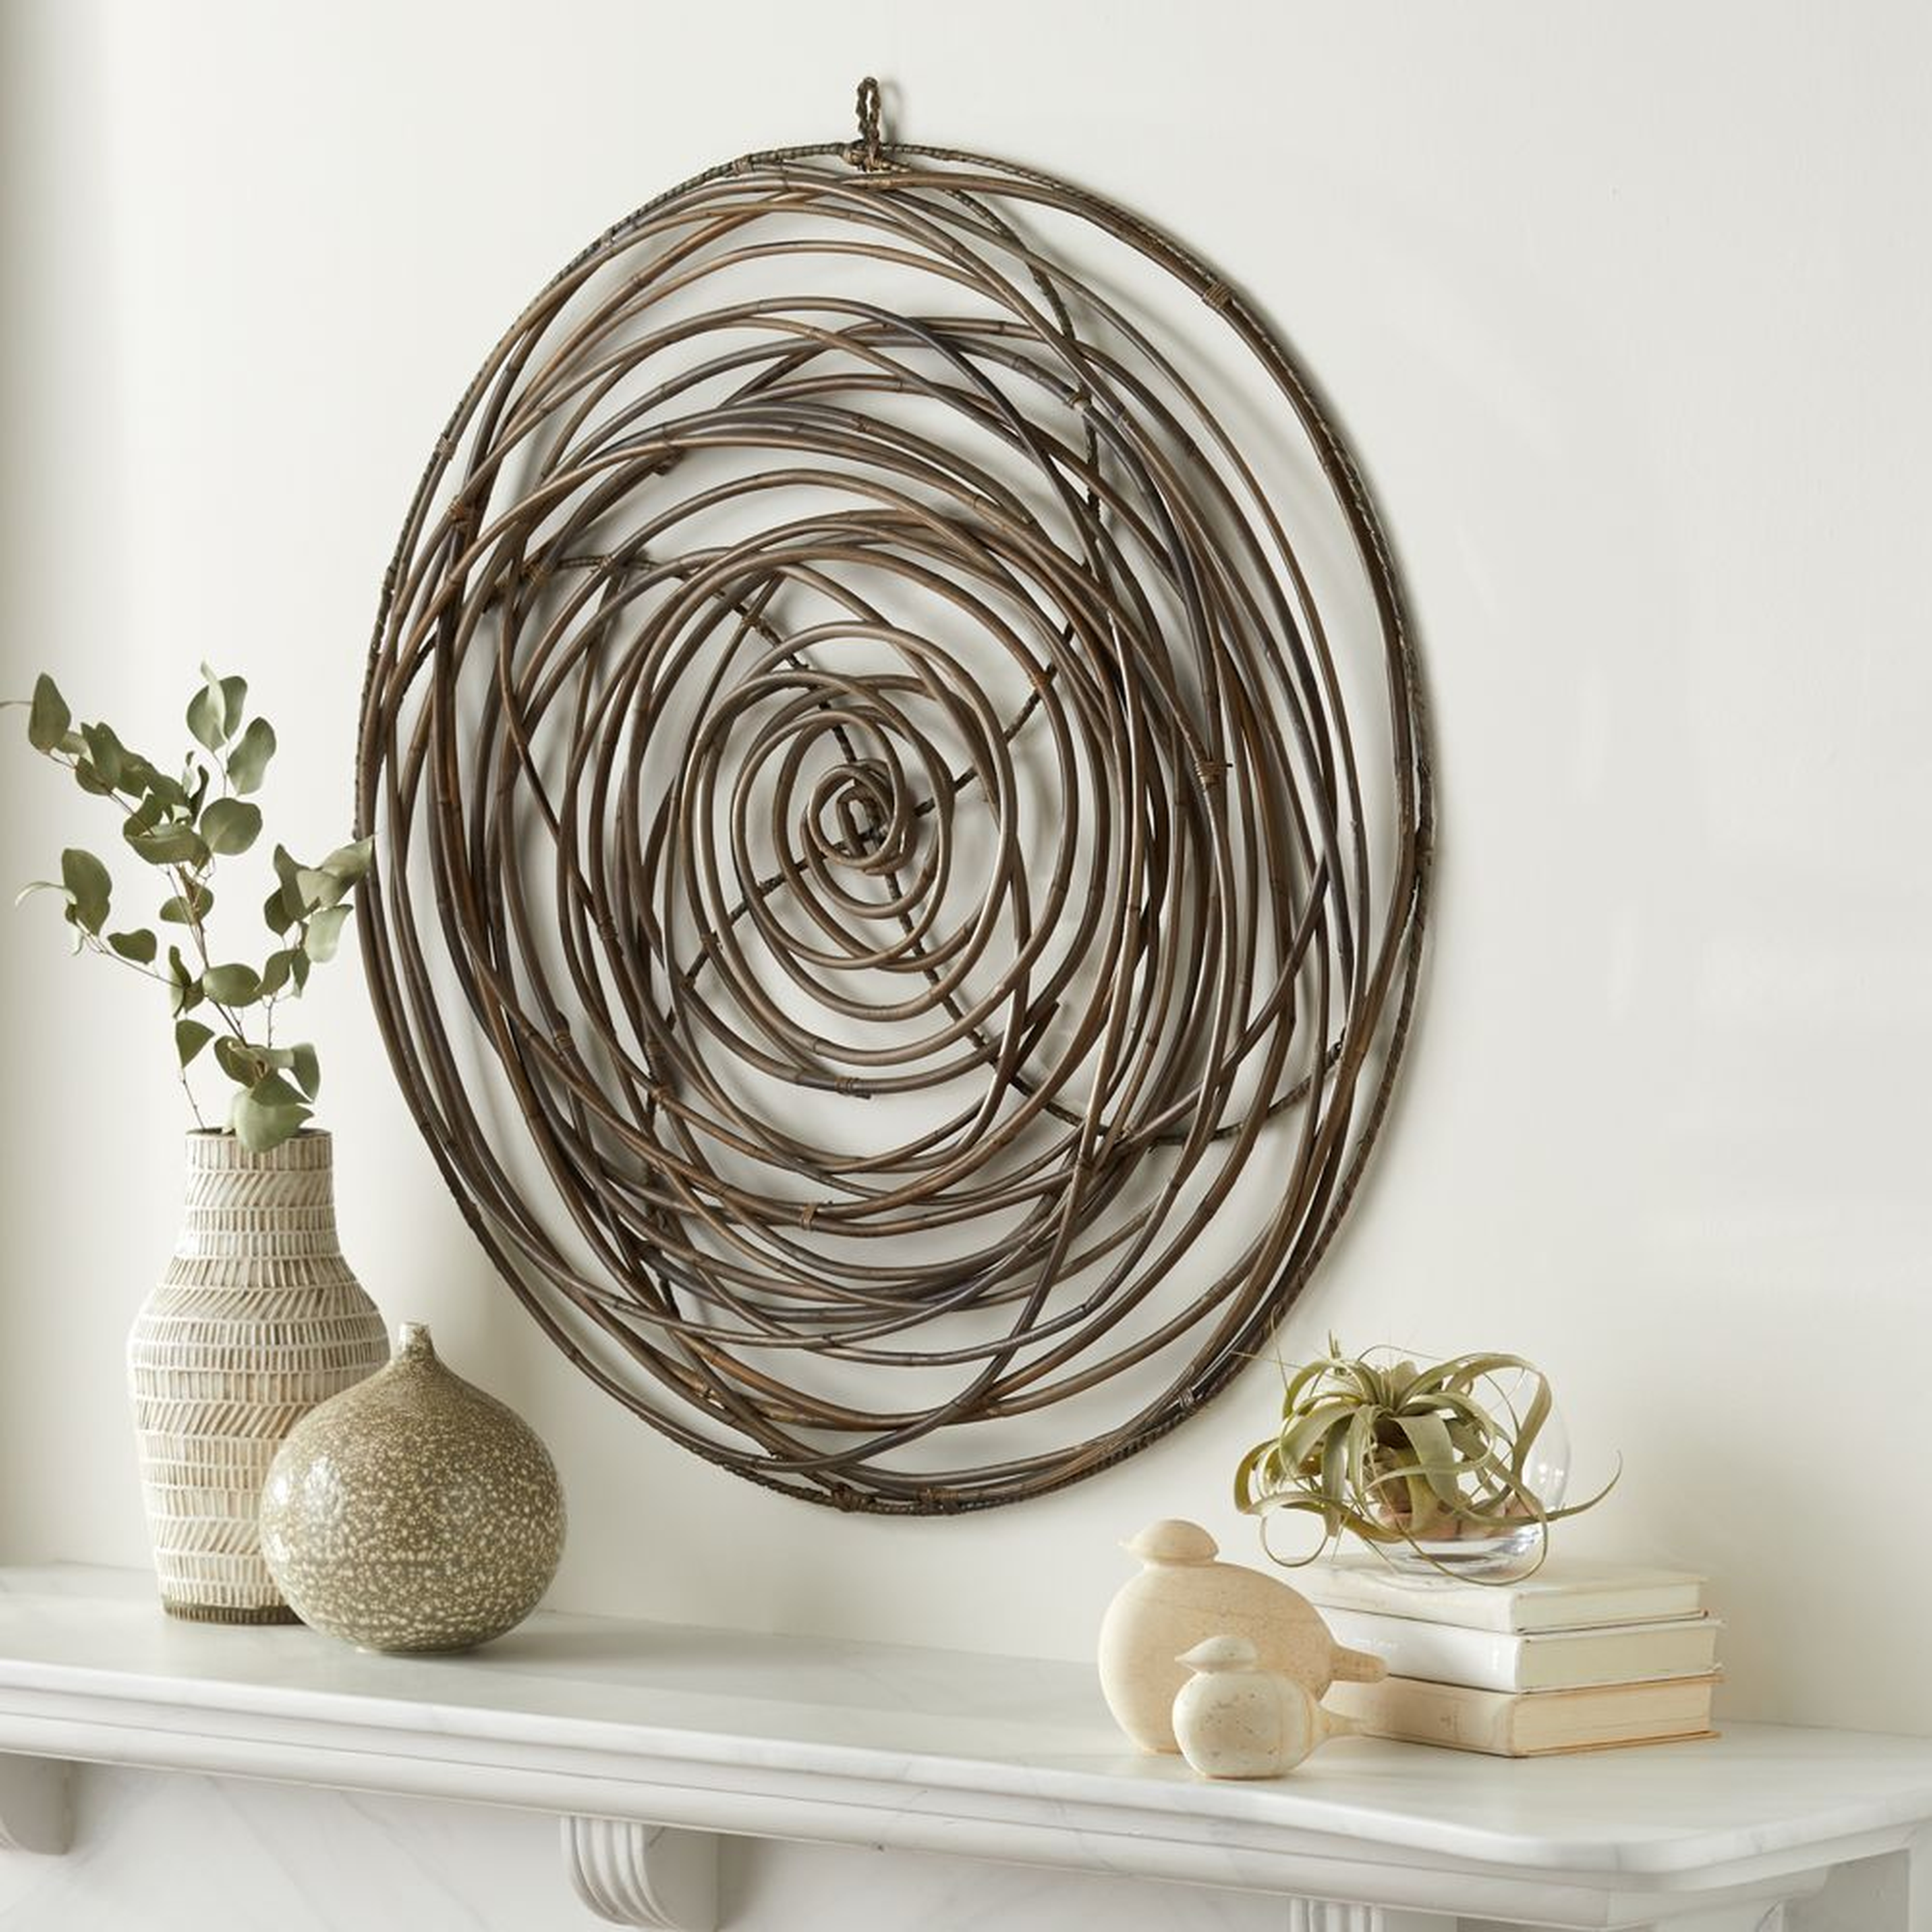 'Scribble Circle' Hand-Crafted Rattan Wall Art 32"x0.39" - Crate and Barrel